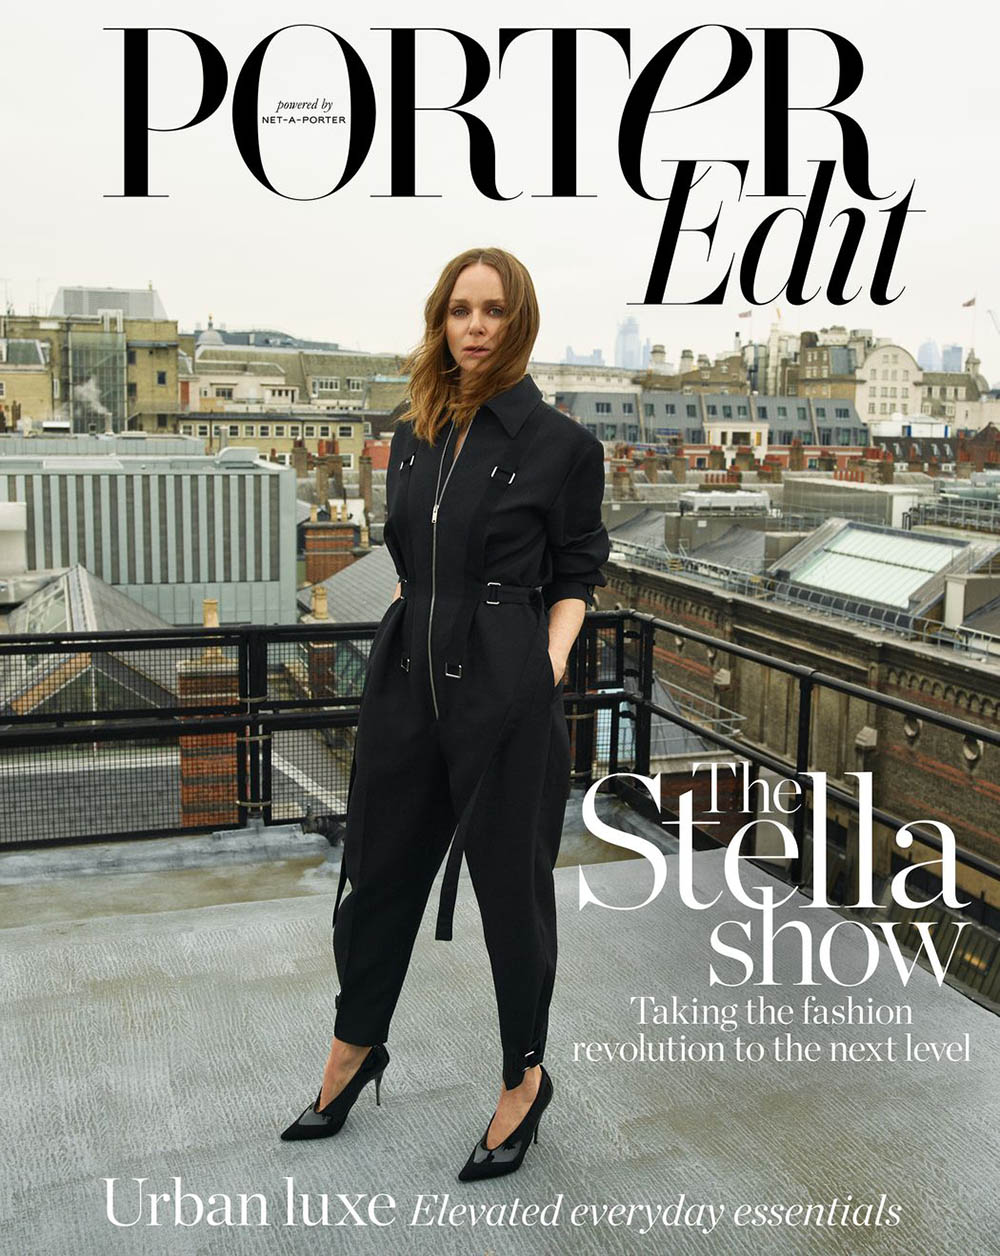 Stella McCartney covers Porter Edit June 21st, 2019 by Matthew Sprout